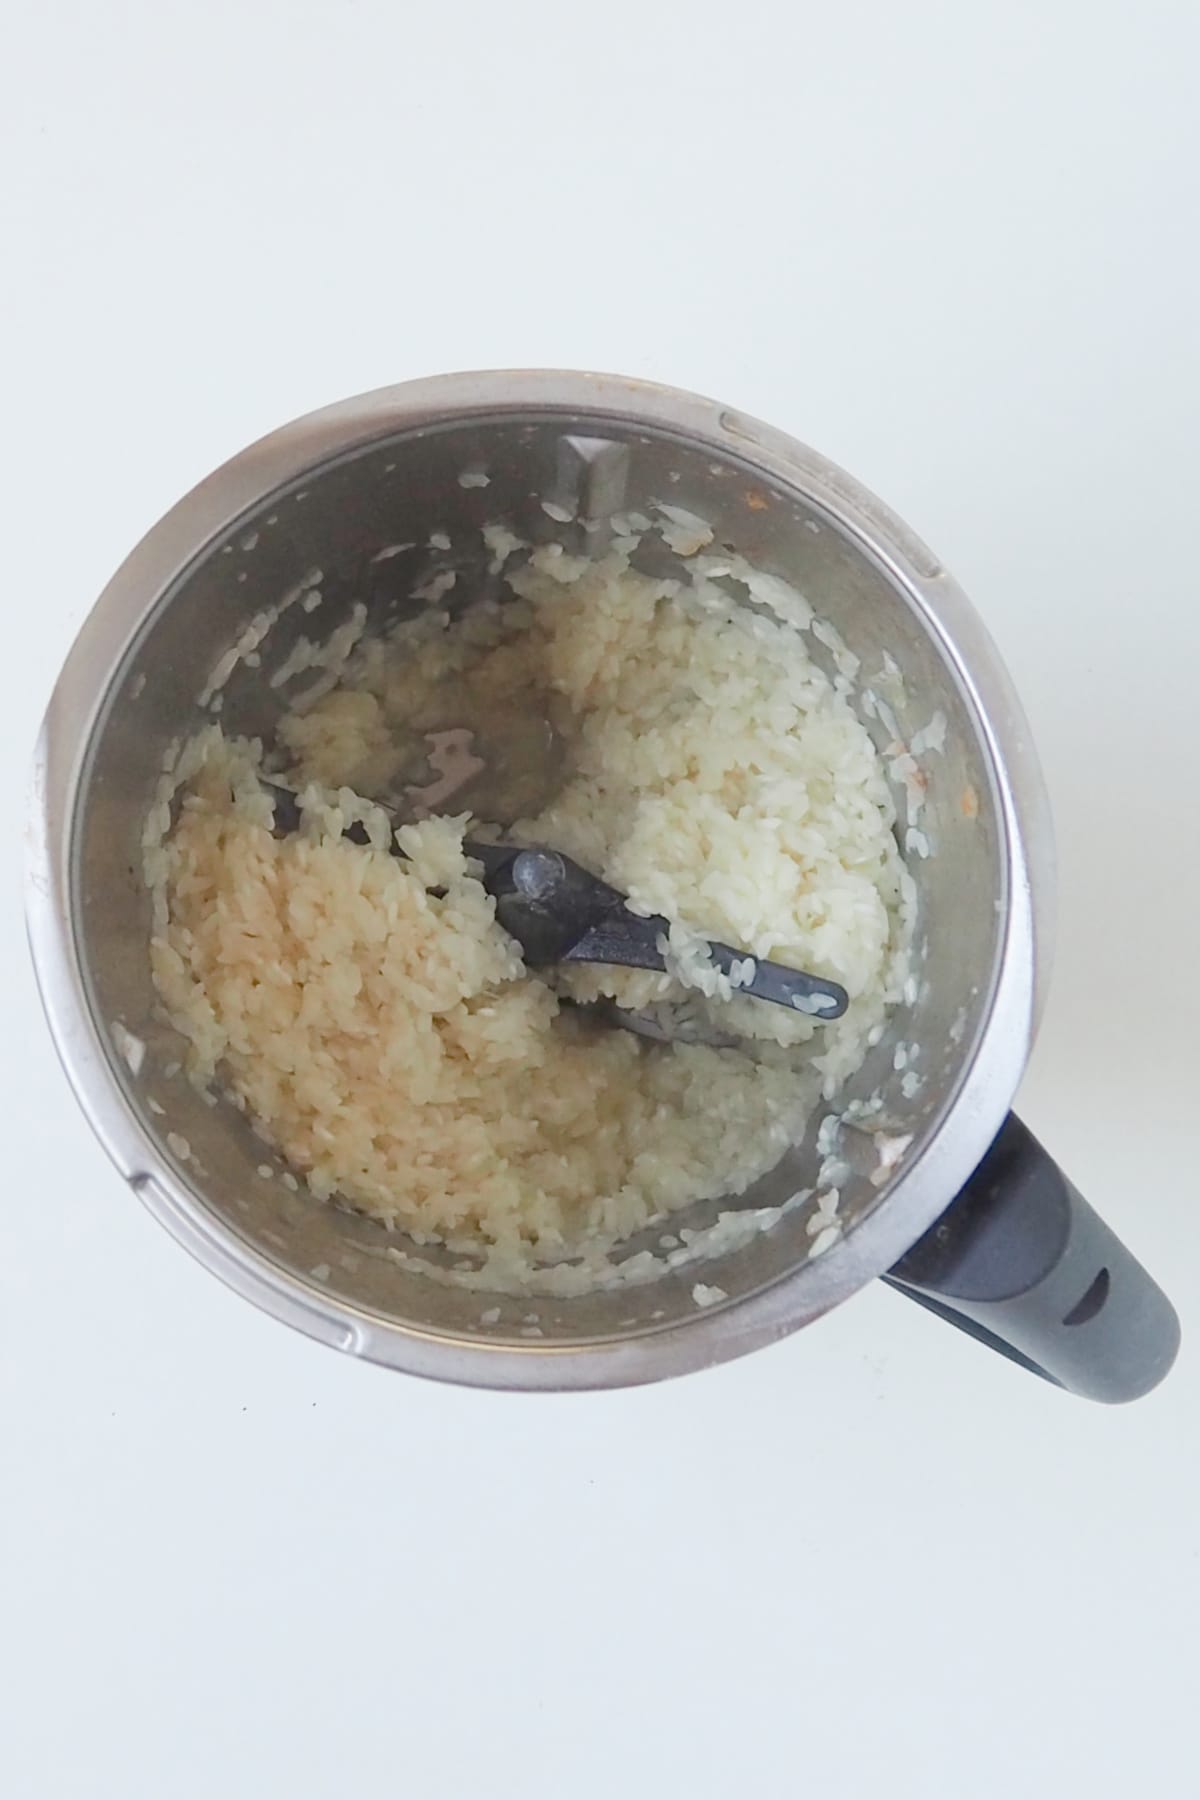 aborio rice in a thermomix bowl.